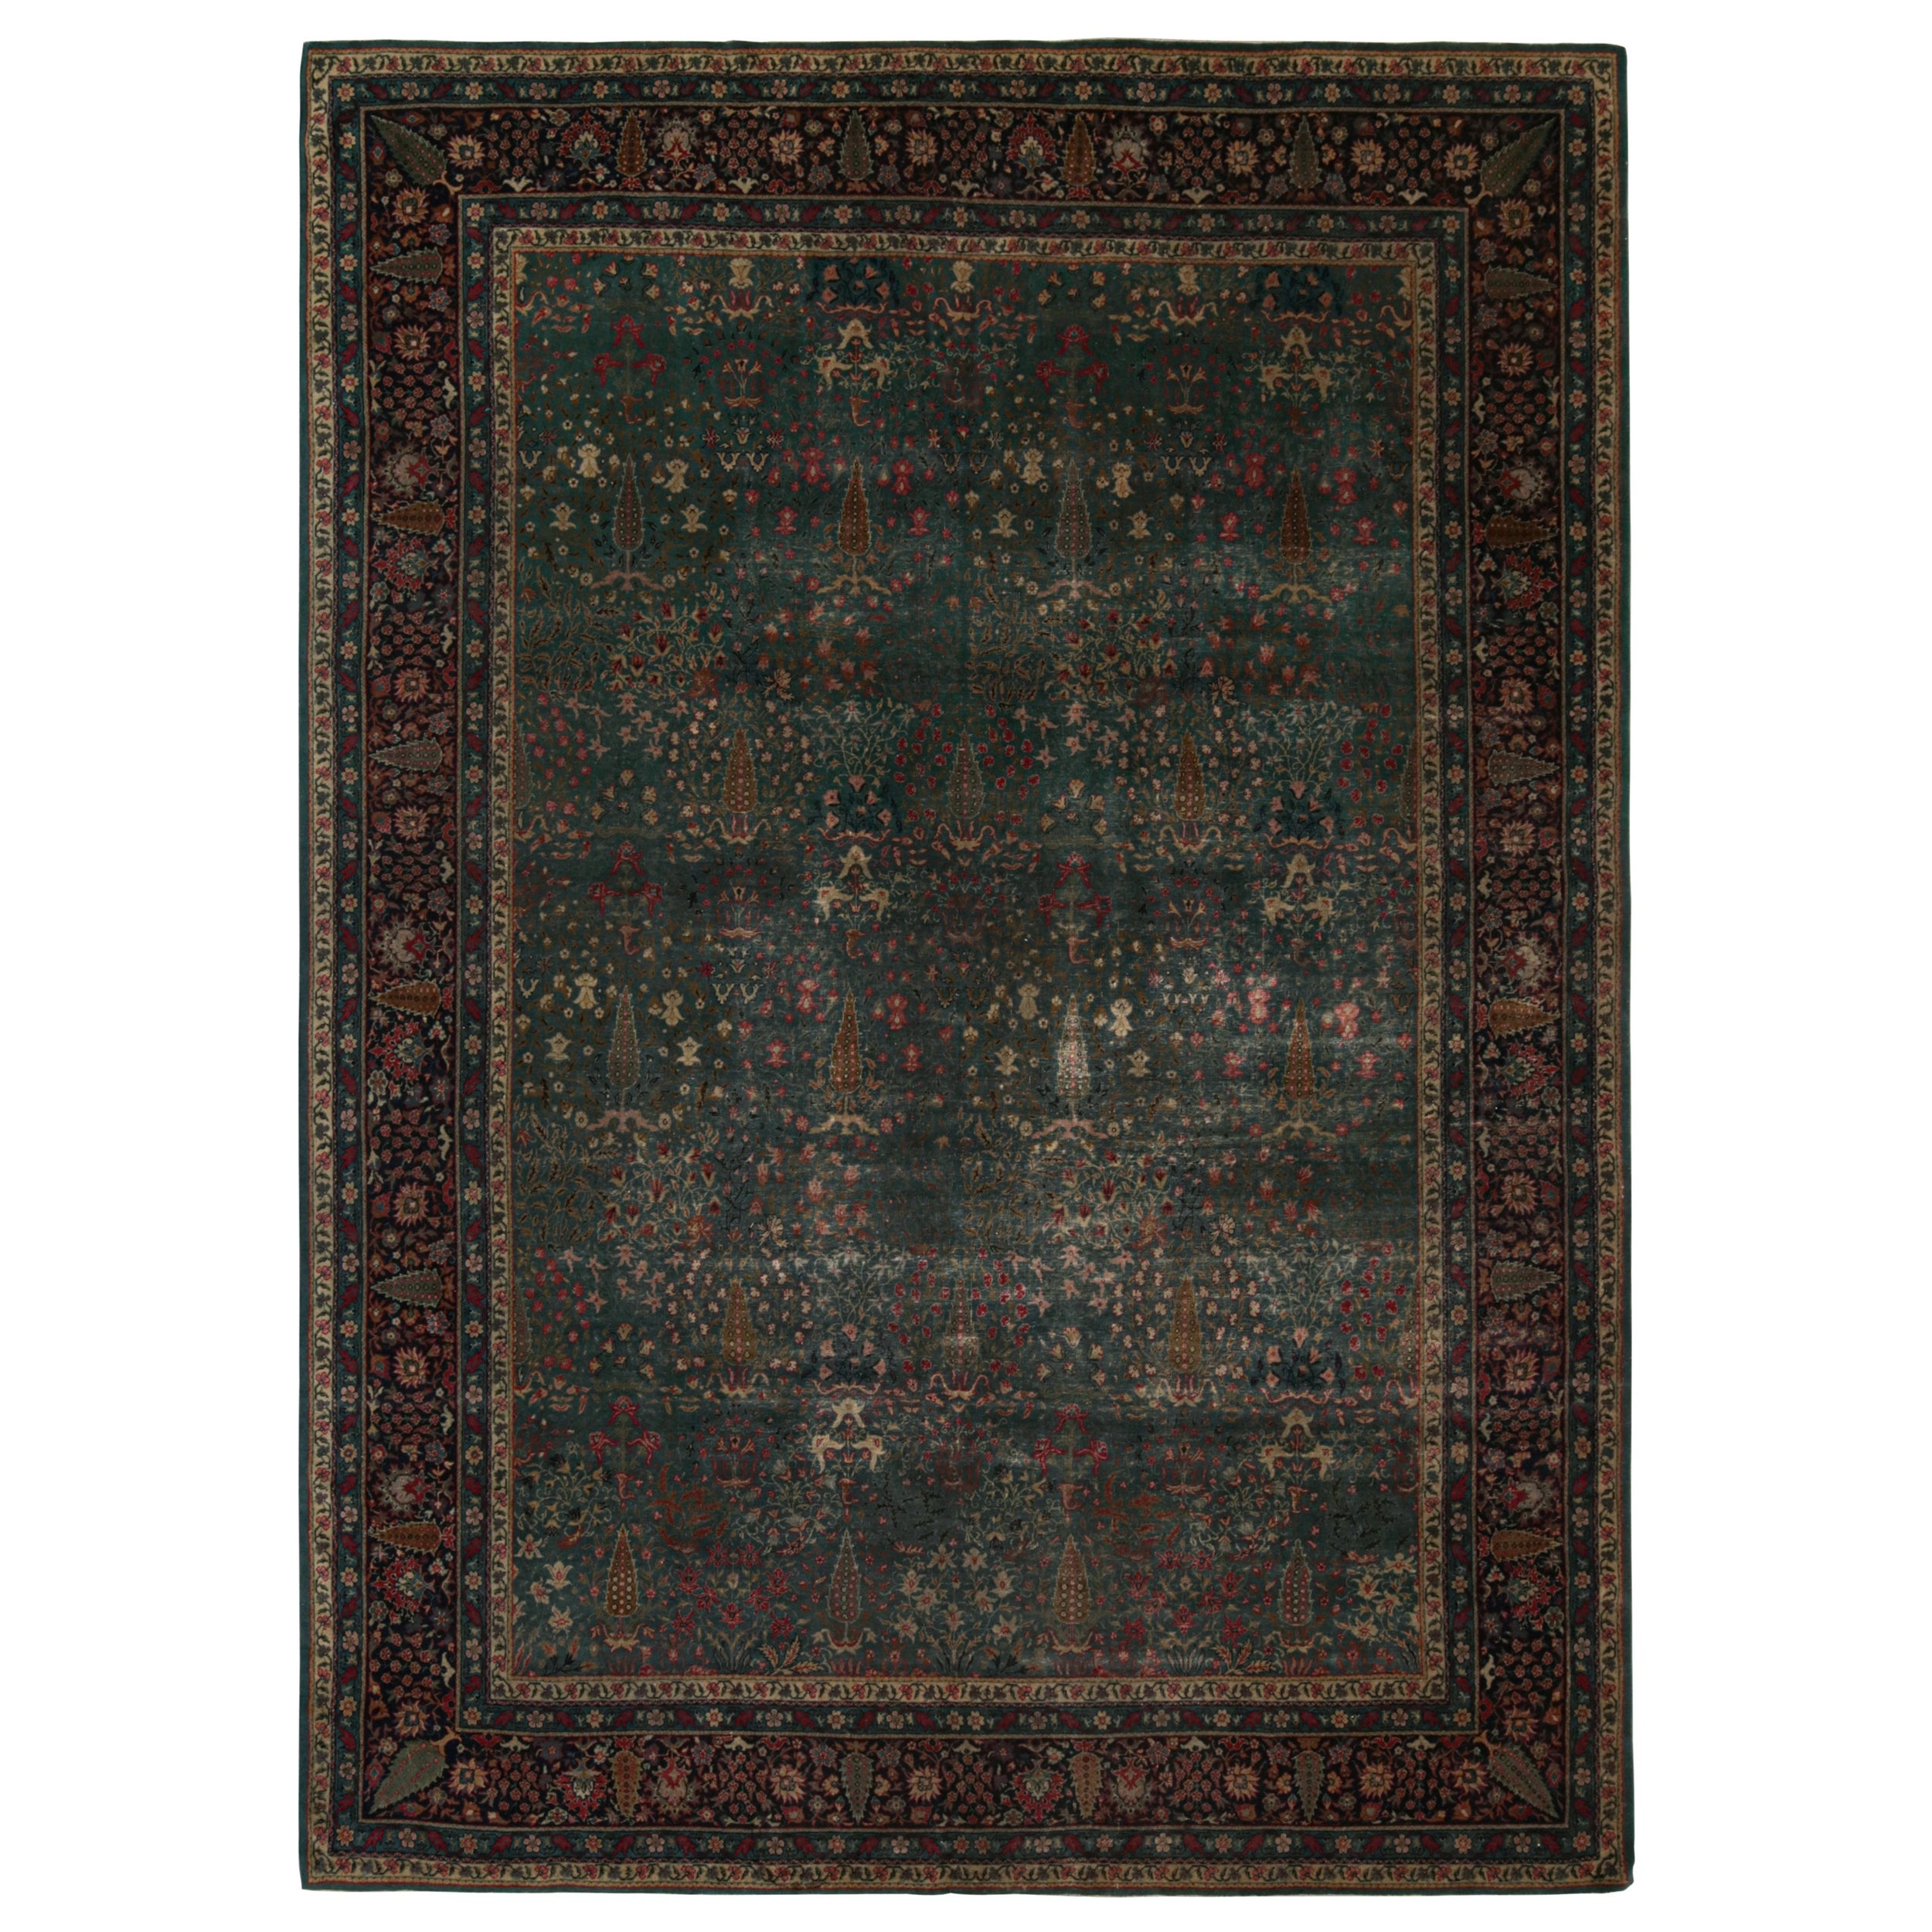 Antique Sivas Rug in Teal, with Floral Patterns, from Rug & Kilim